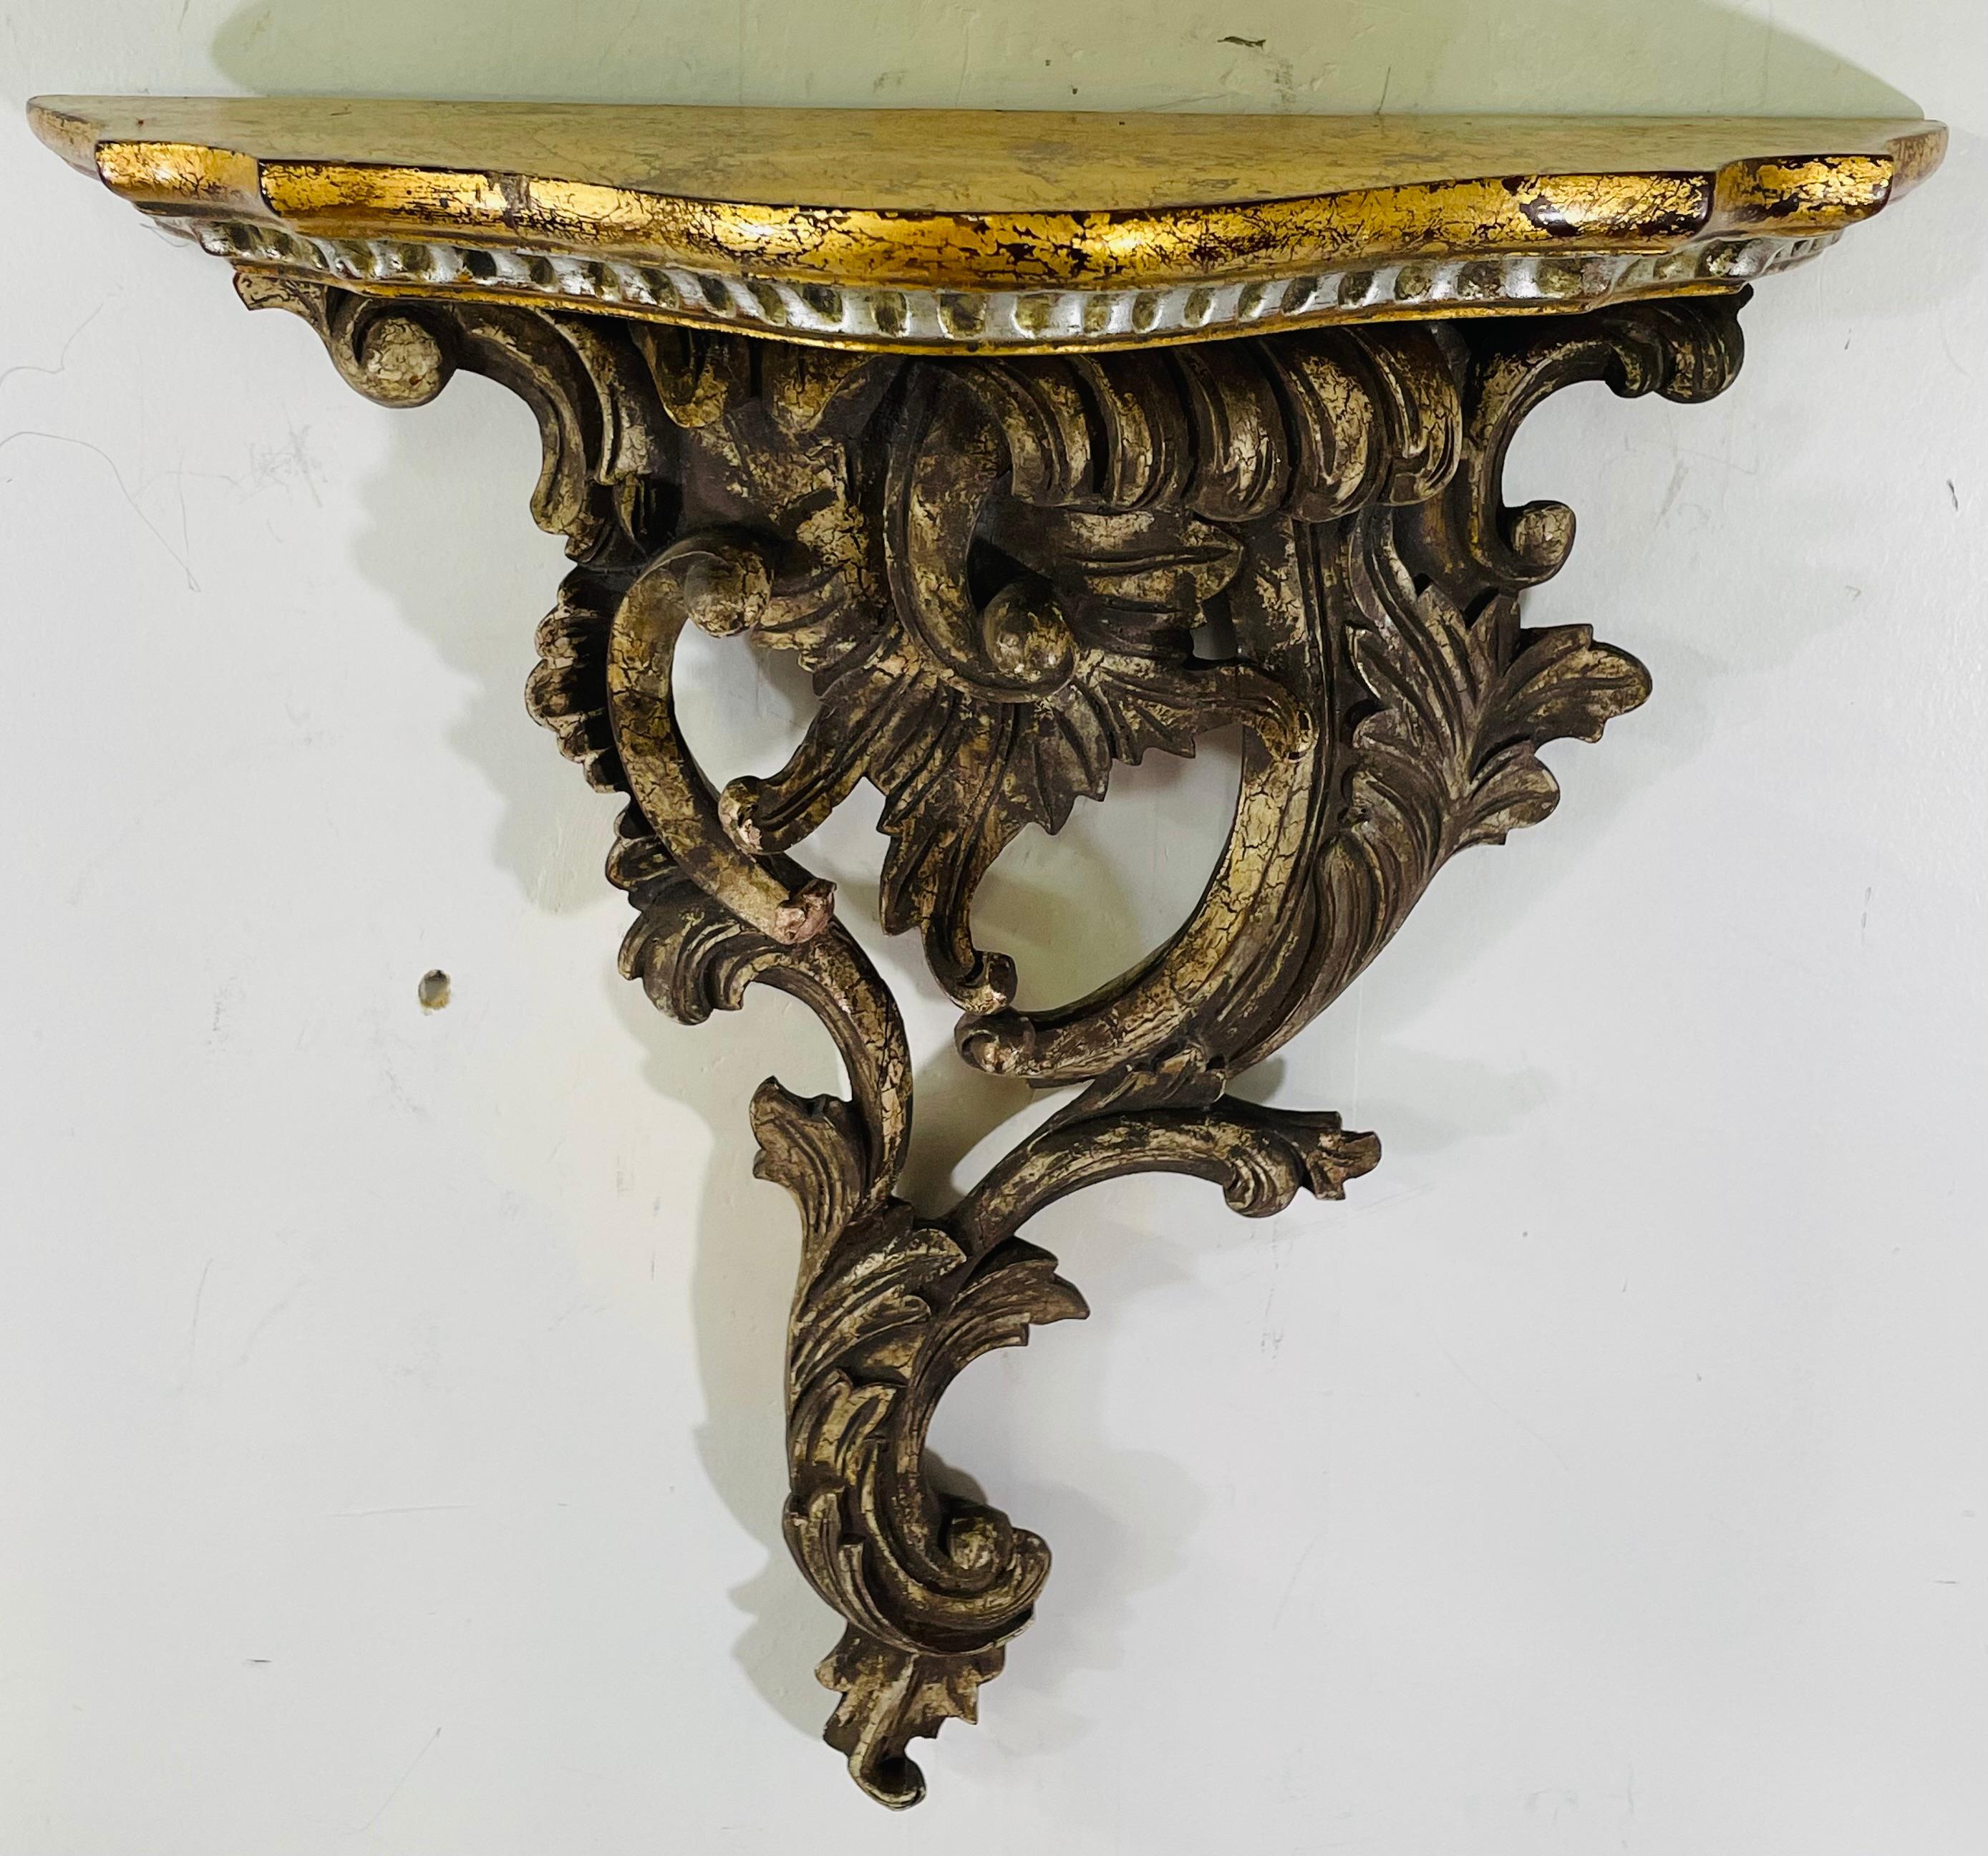 A pair of French Baroque style hand carved gesso and wood floral scroll design wall brackets featuring a scalloped gild painted shelving. This elegant pair of brackets will add style and sophistication any wall or space. 

Dimensions: 15